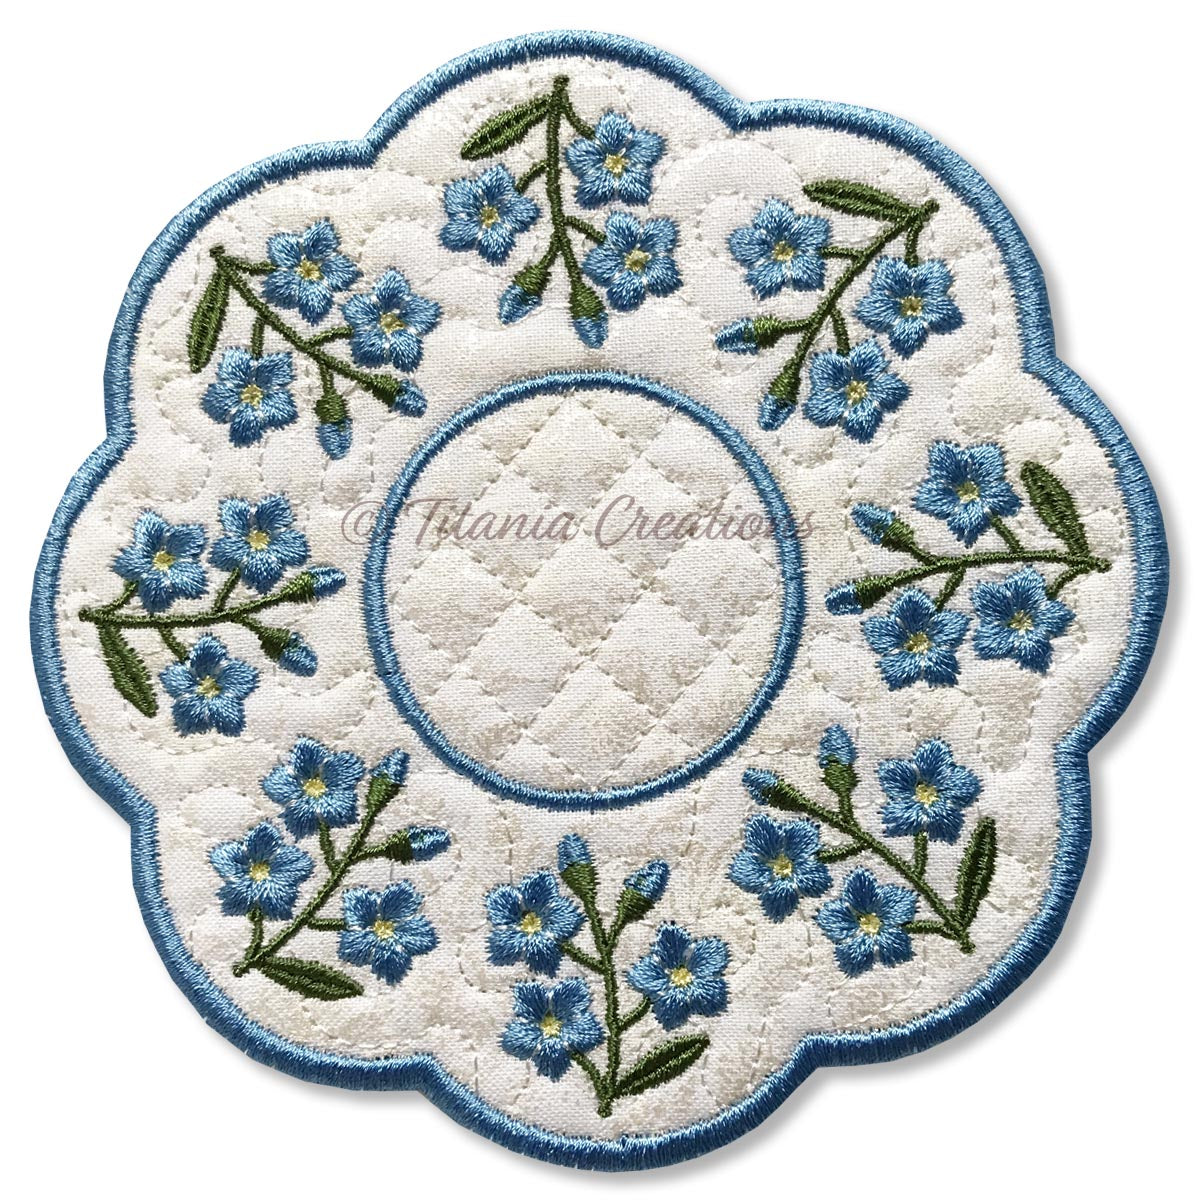 ITH Forget Me Not Candle Mat 5x5 6x6 7x7 8x8